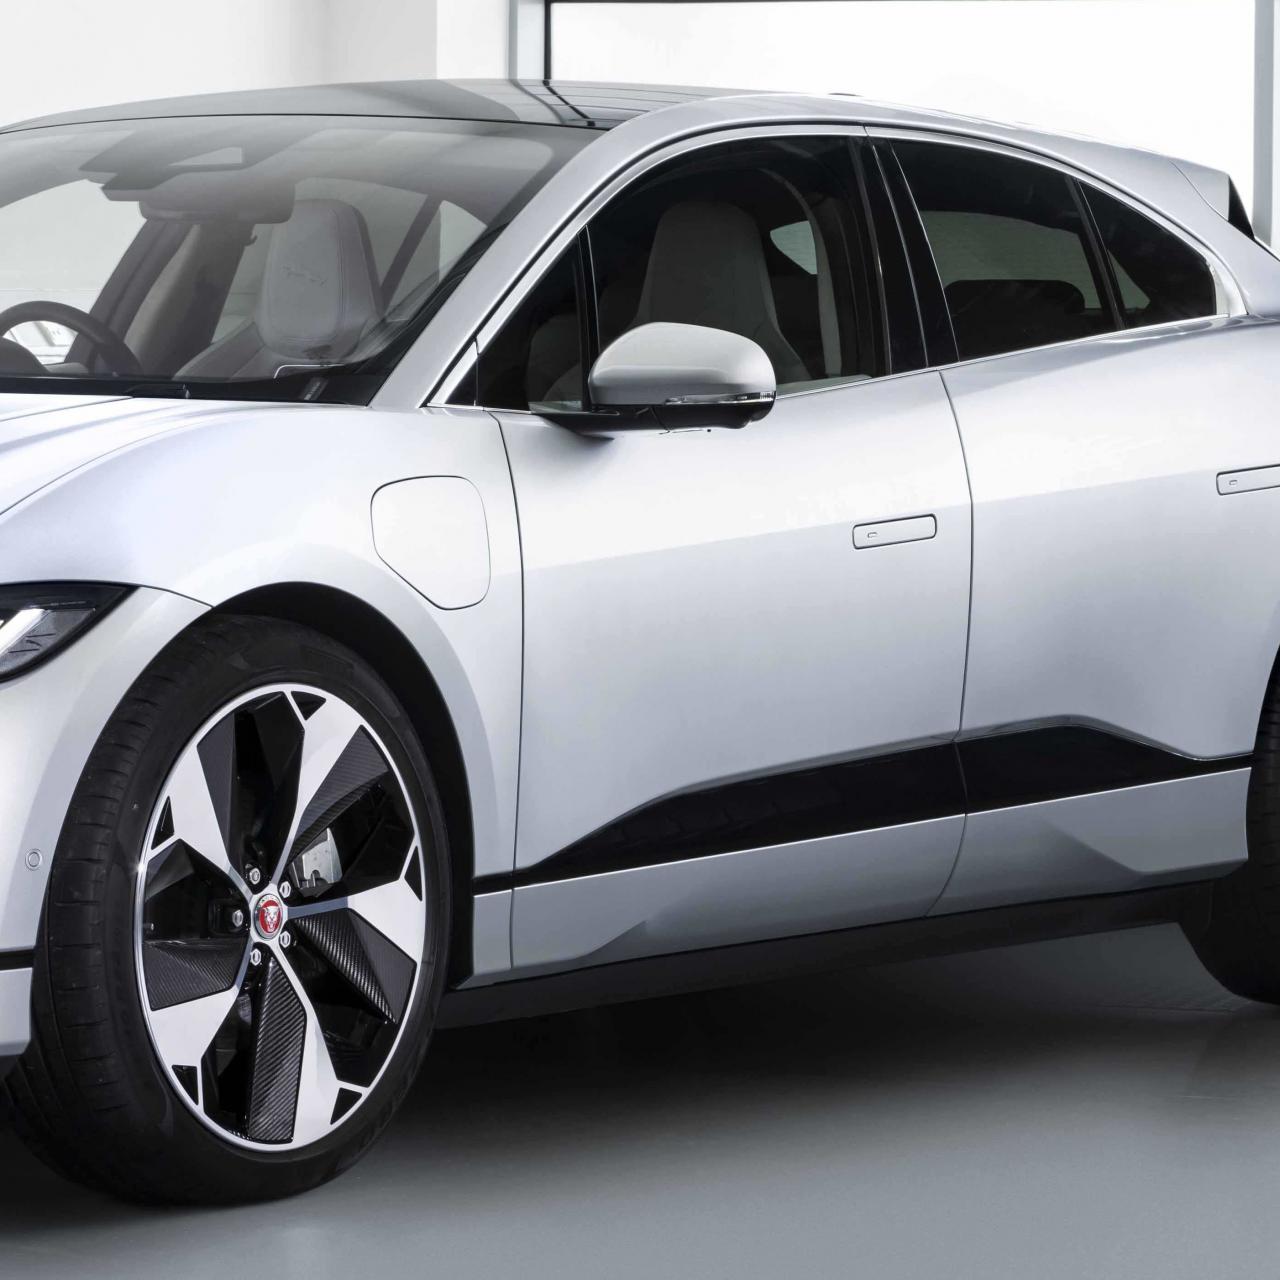 Jaguar creating zero-emission energy from second-life I-PACE batteries